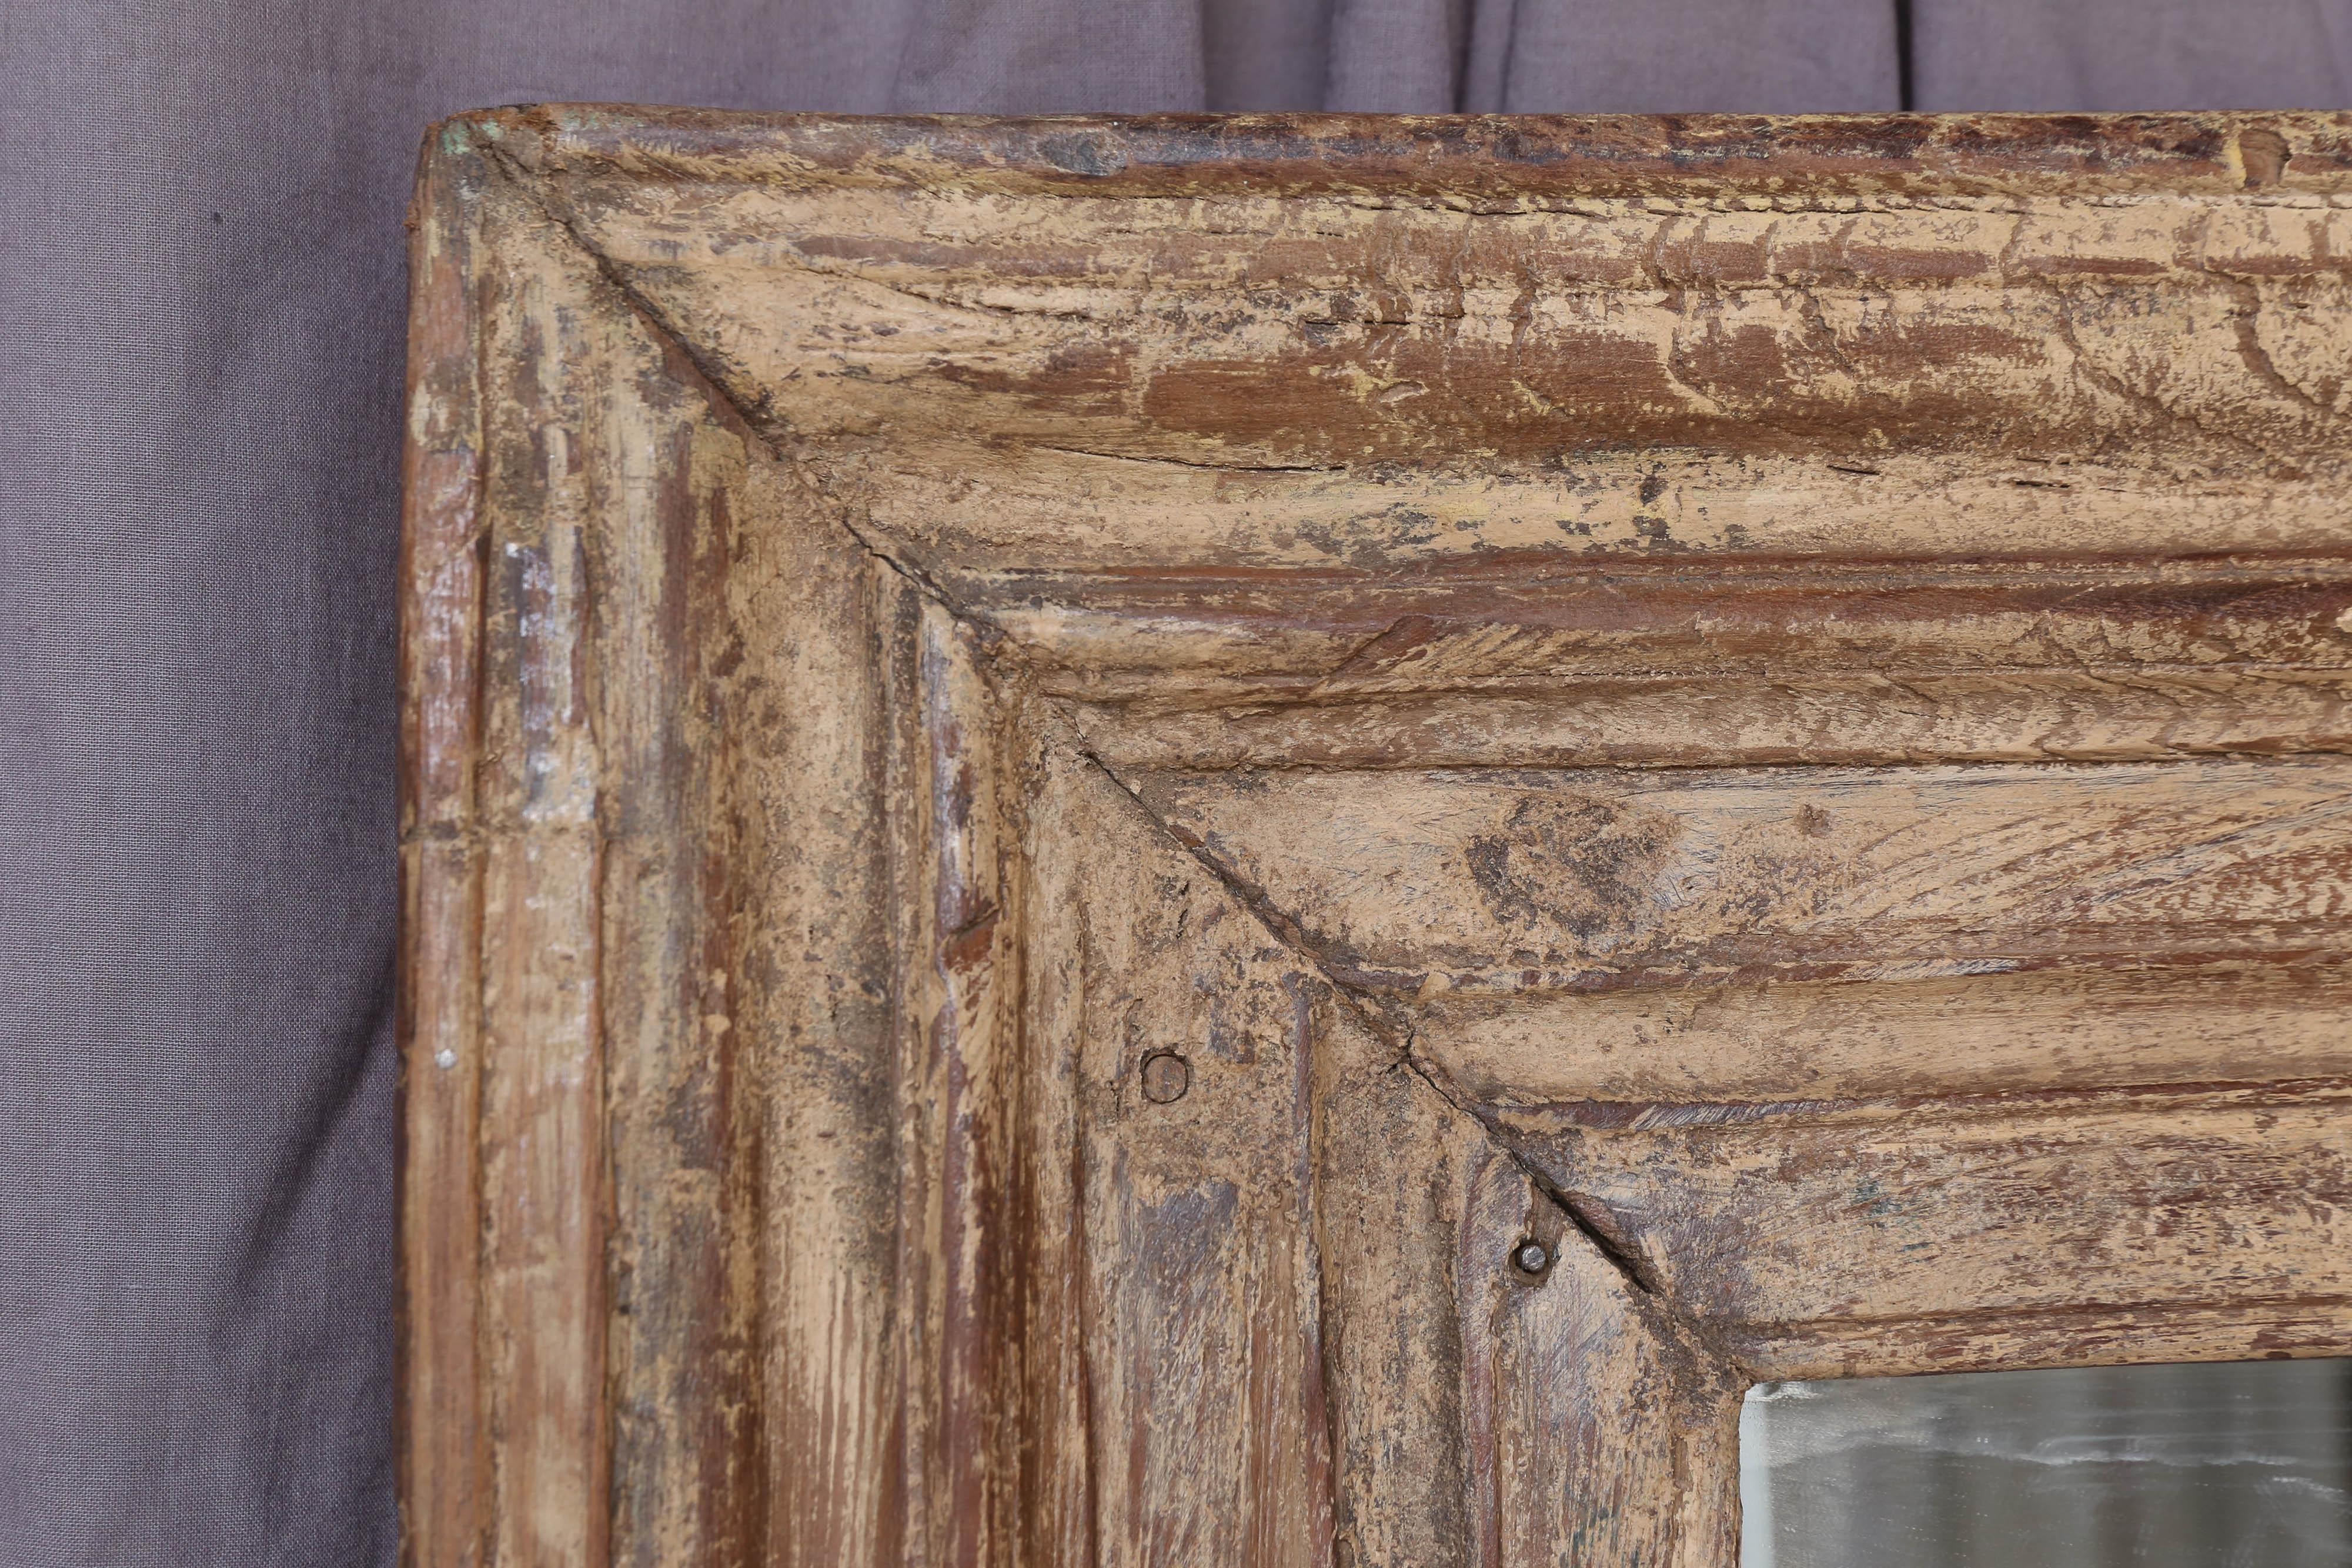 The frame for the mirror comes from a window frame of an 19th century plantation home.
The frame was made in solid teak wood and is heavy. It was originally painted and repainted several times. Some original paints can be seen still sticking to the